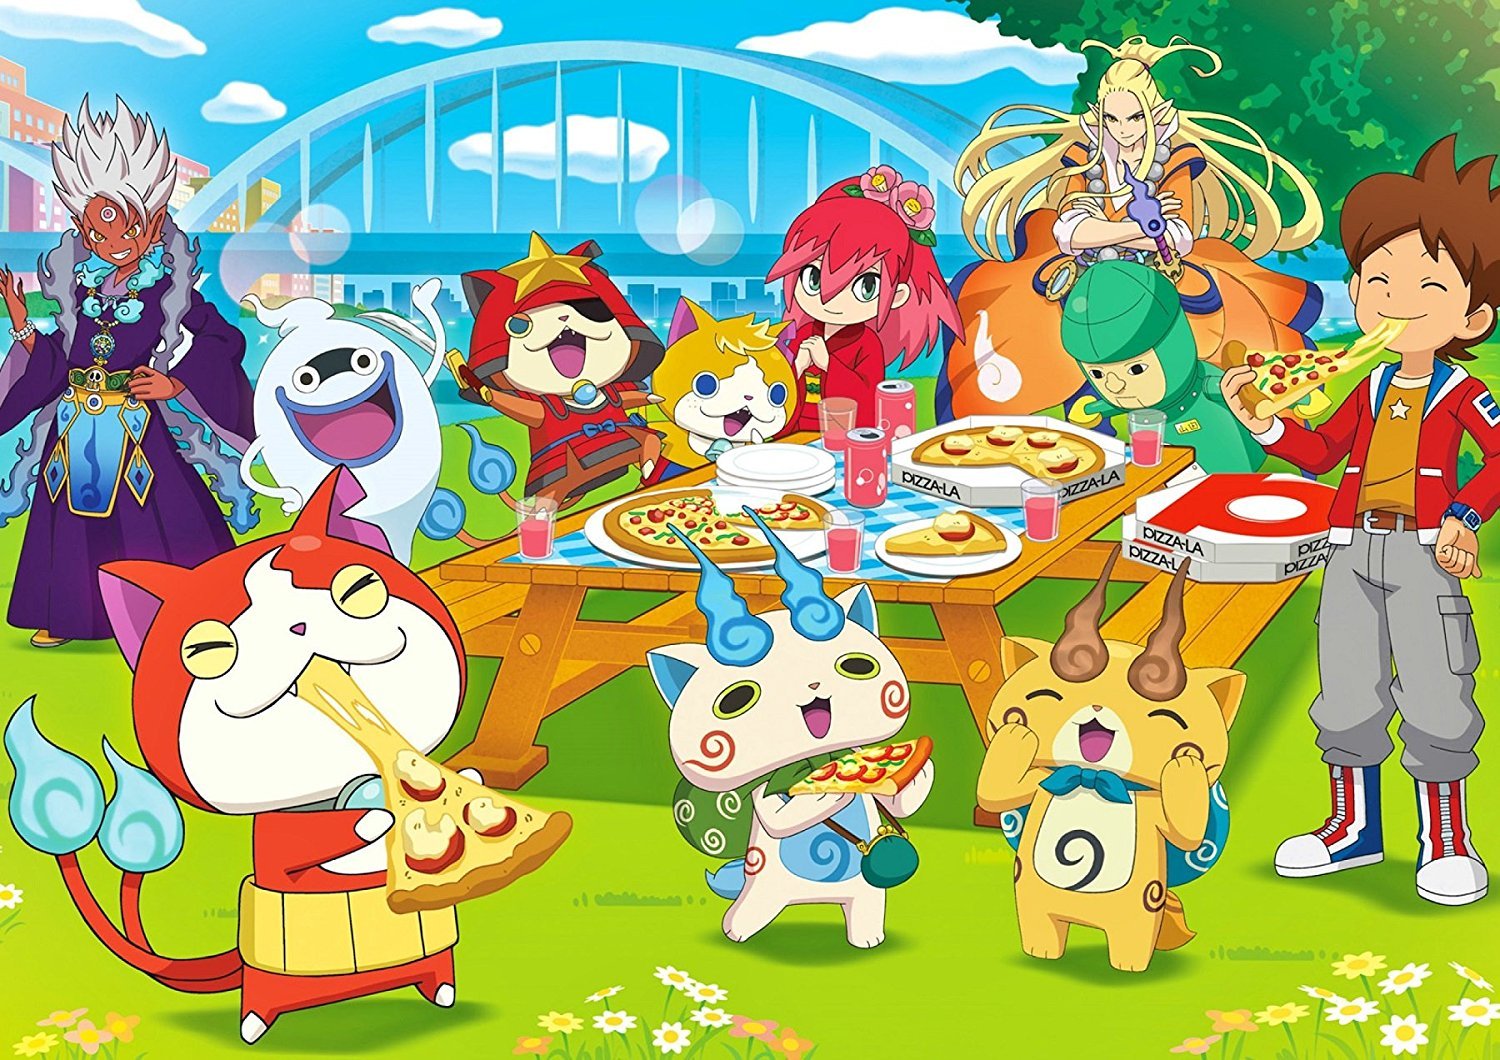 There are far more images available for Yo-kai Watch, but these are the one...